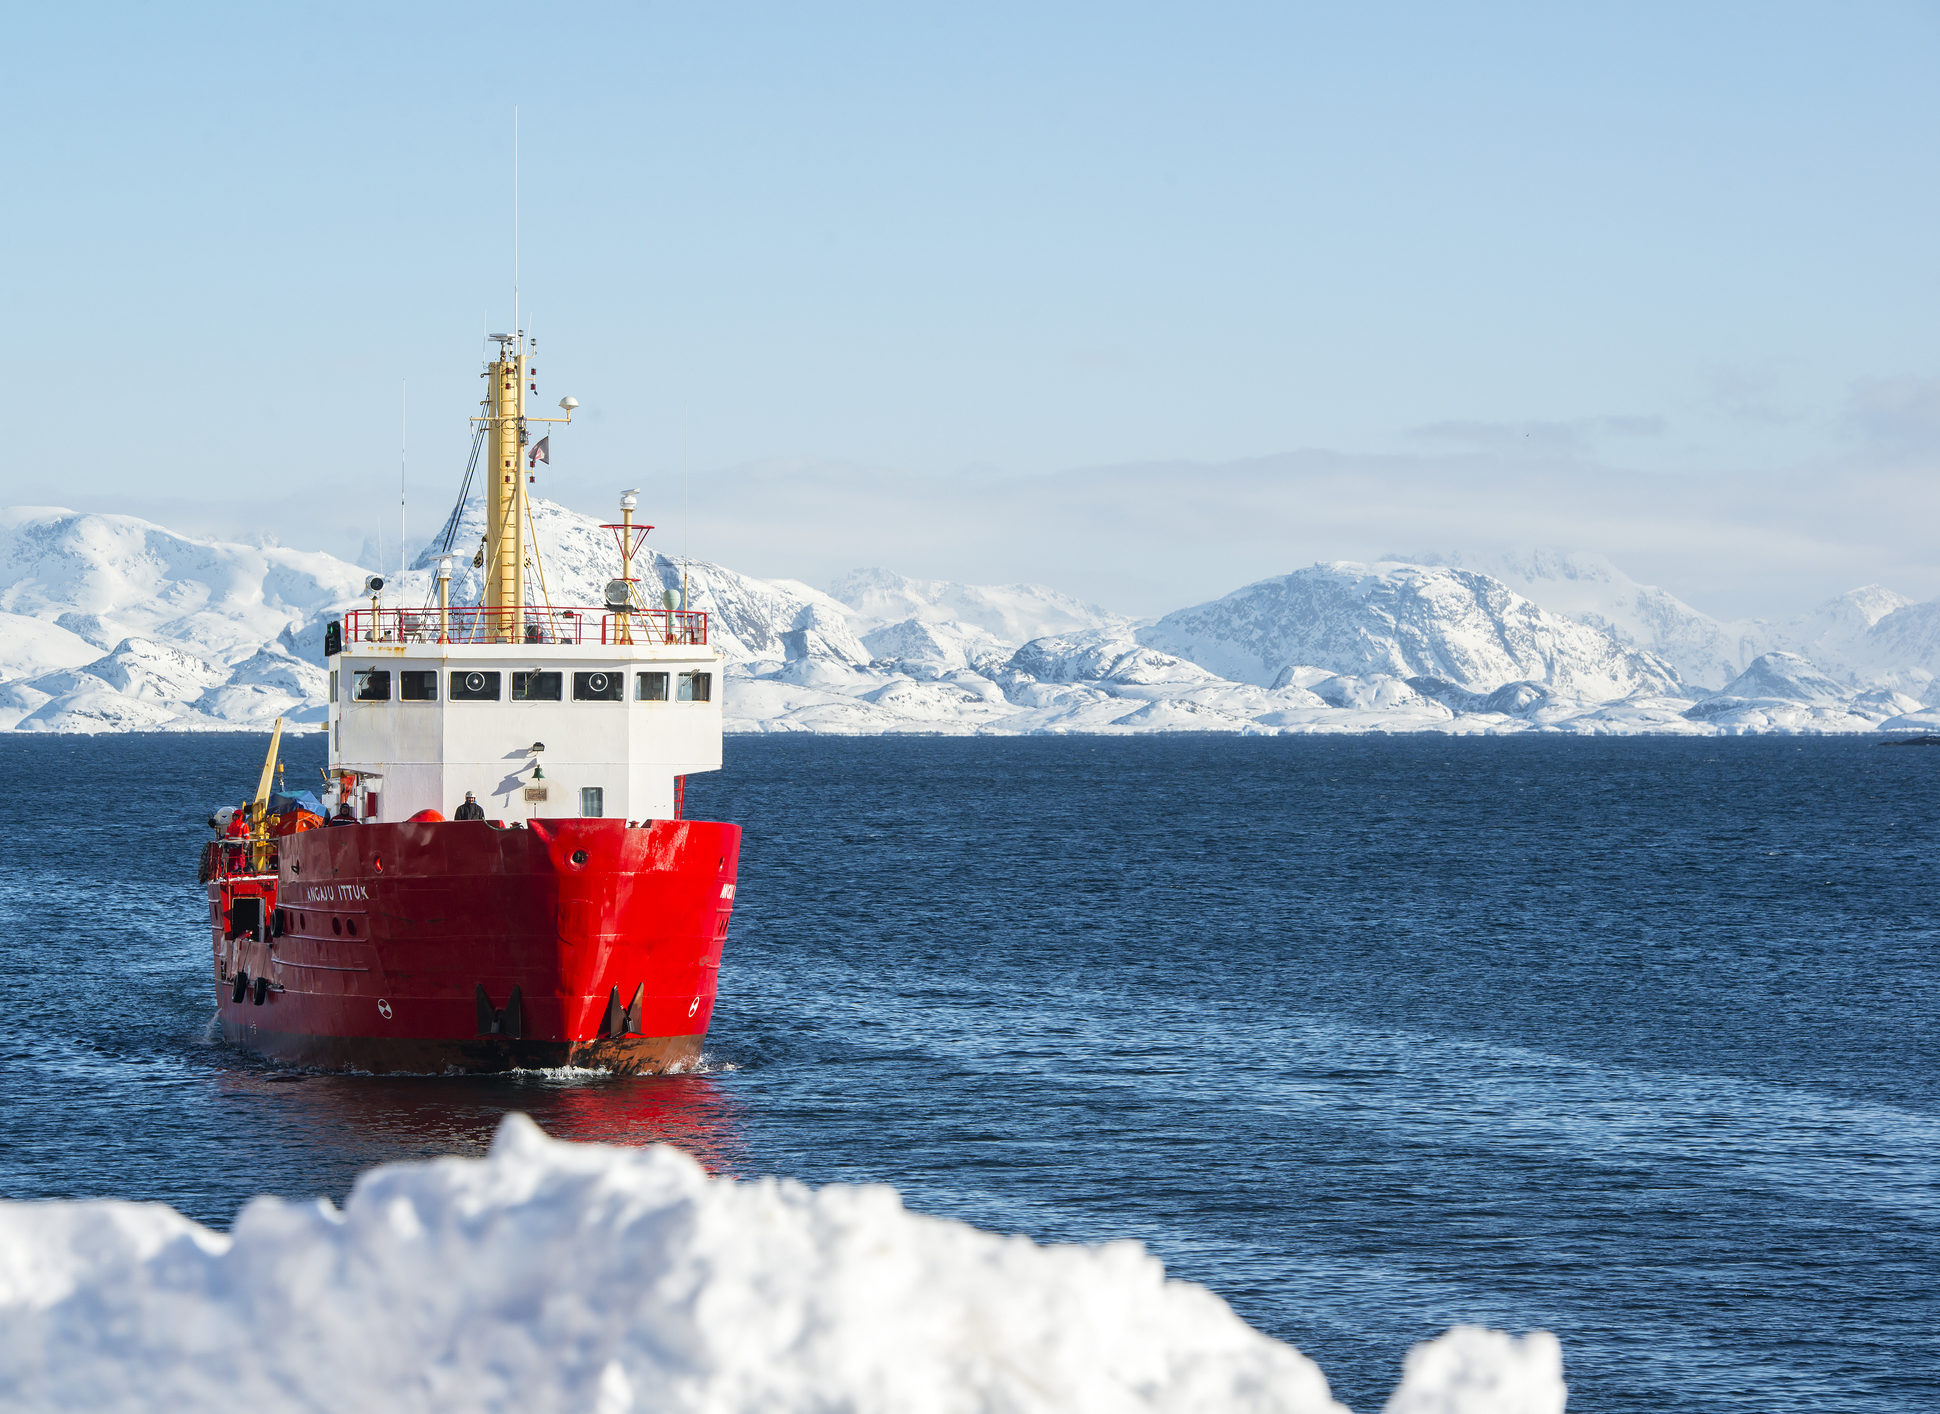 Freight vessel in the Arctic sea